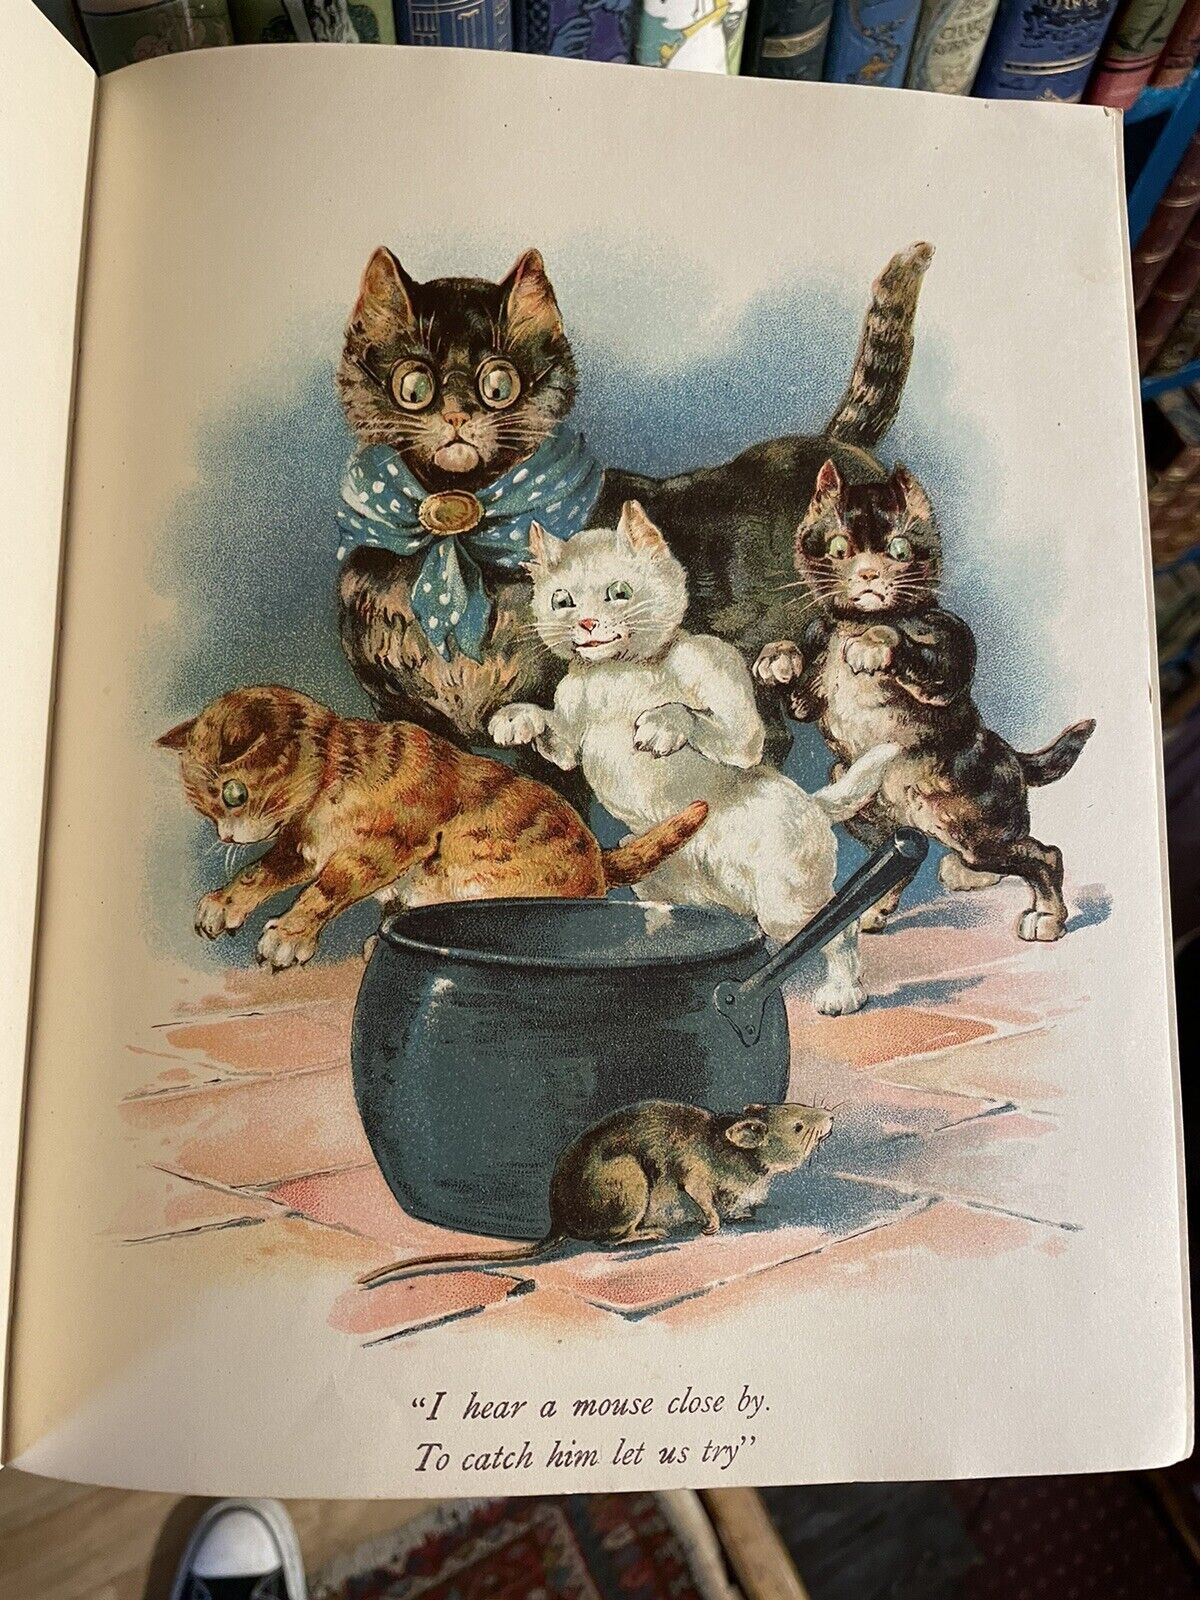 1898 Three Little Kittens : Raphael Tuck and Sons : Chromolithographs of Cats